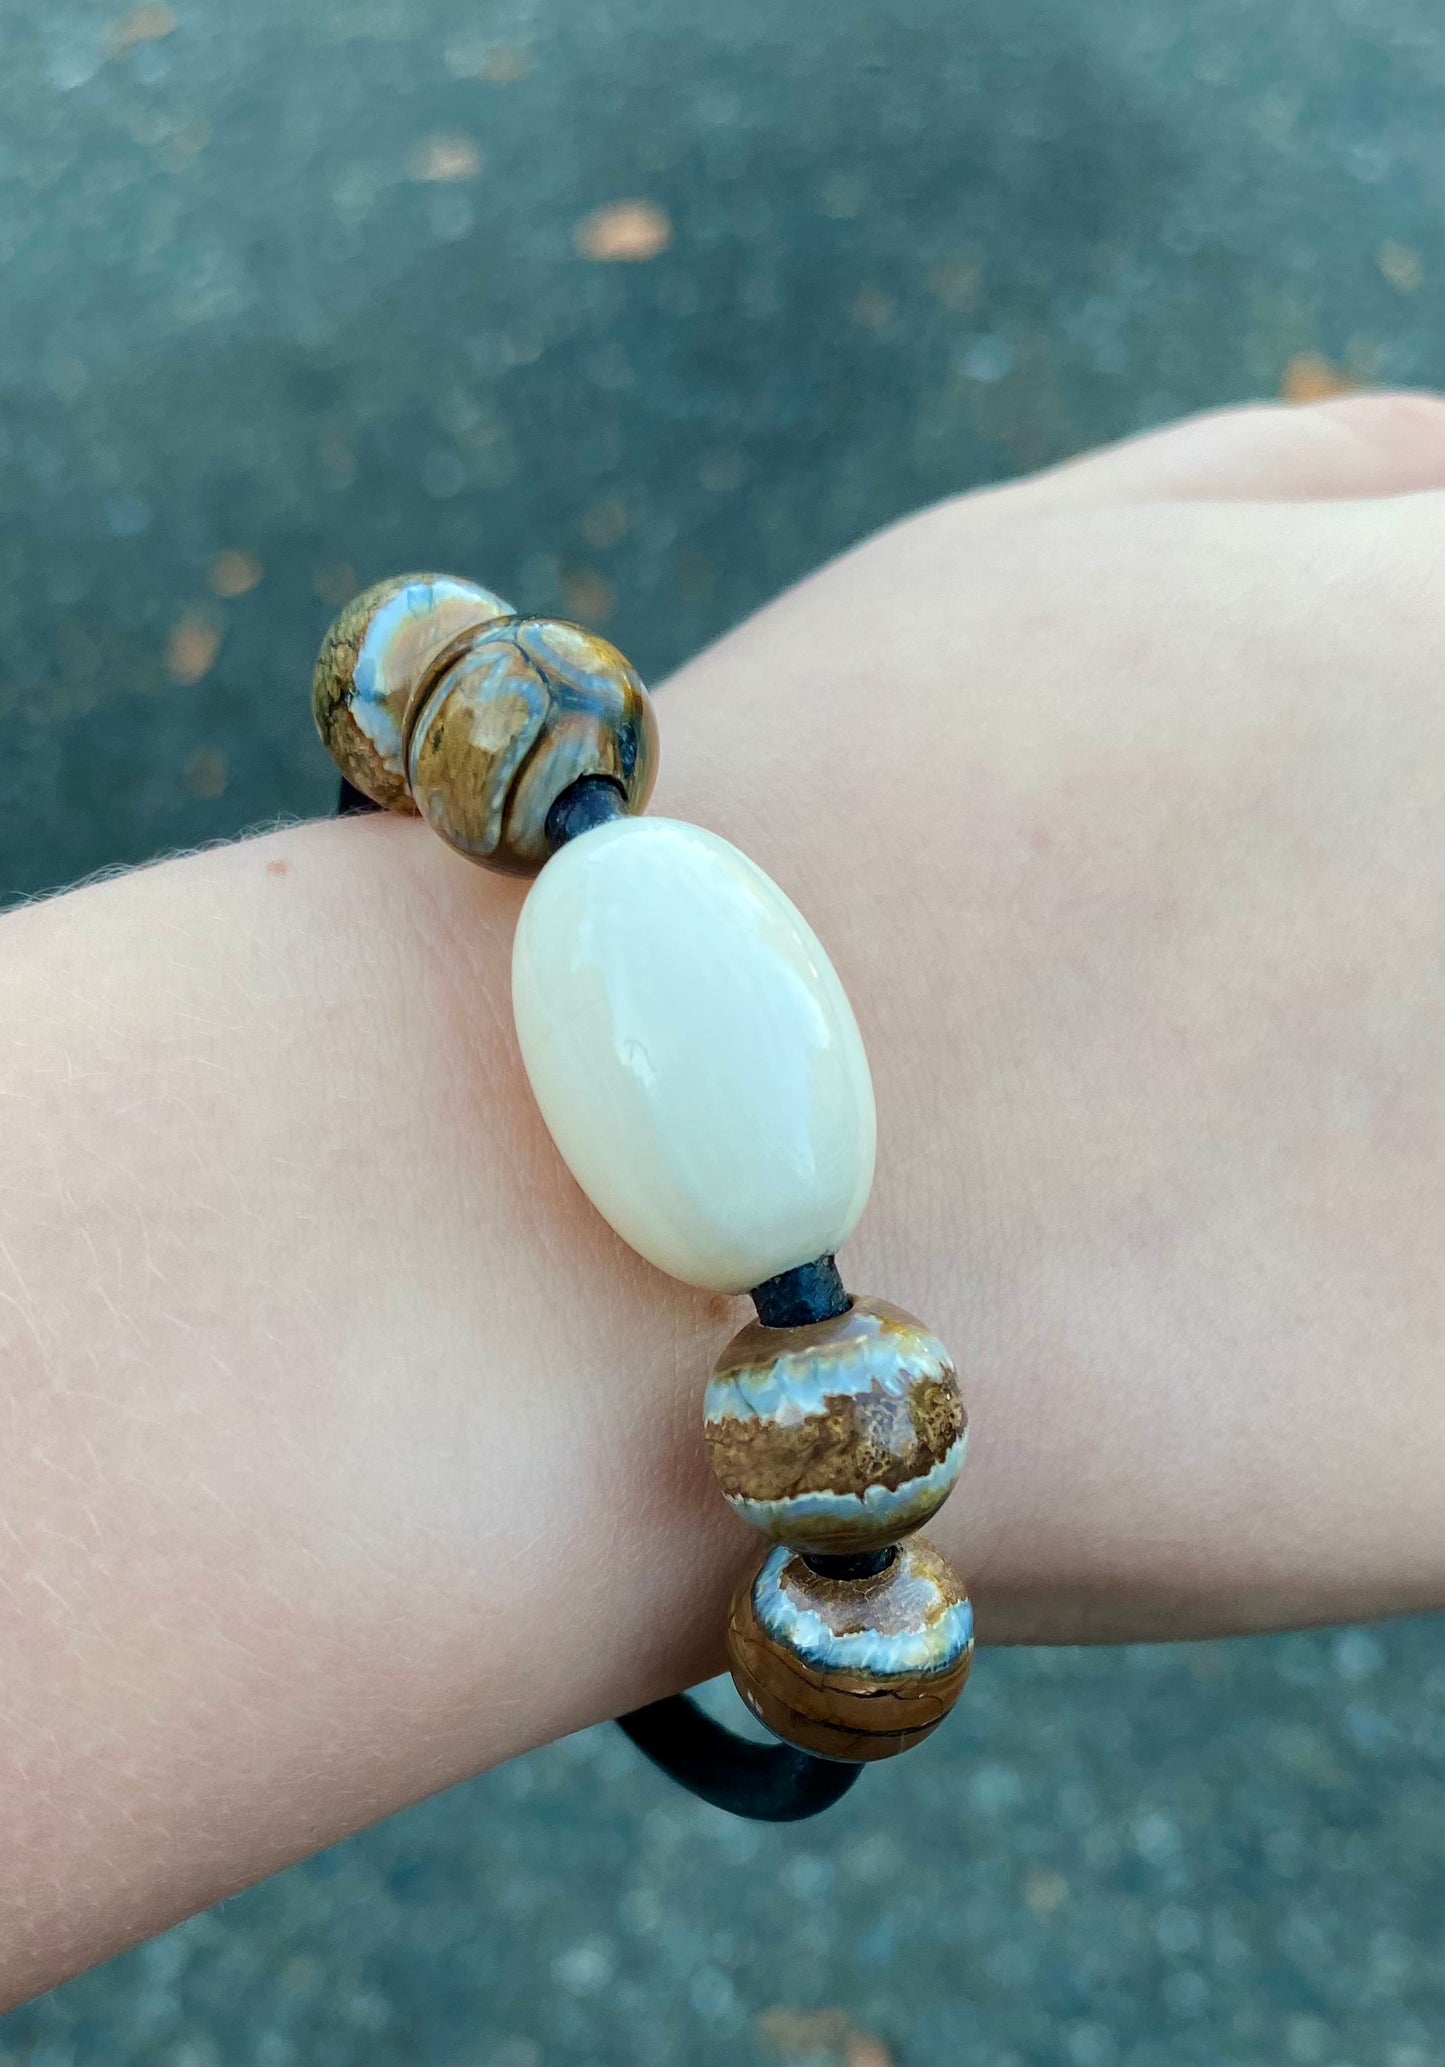 Woolly Mammoth Ivory + Tooth Bracelet